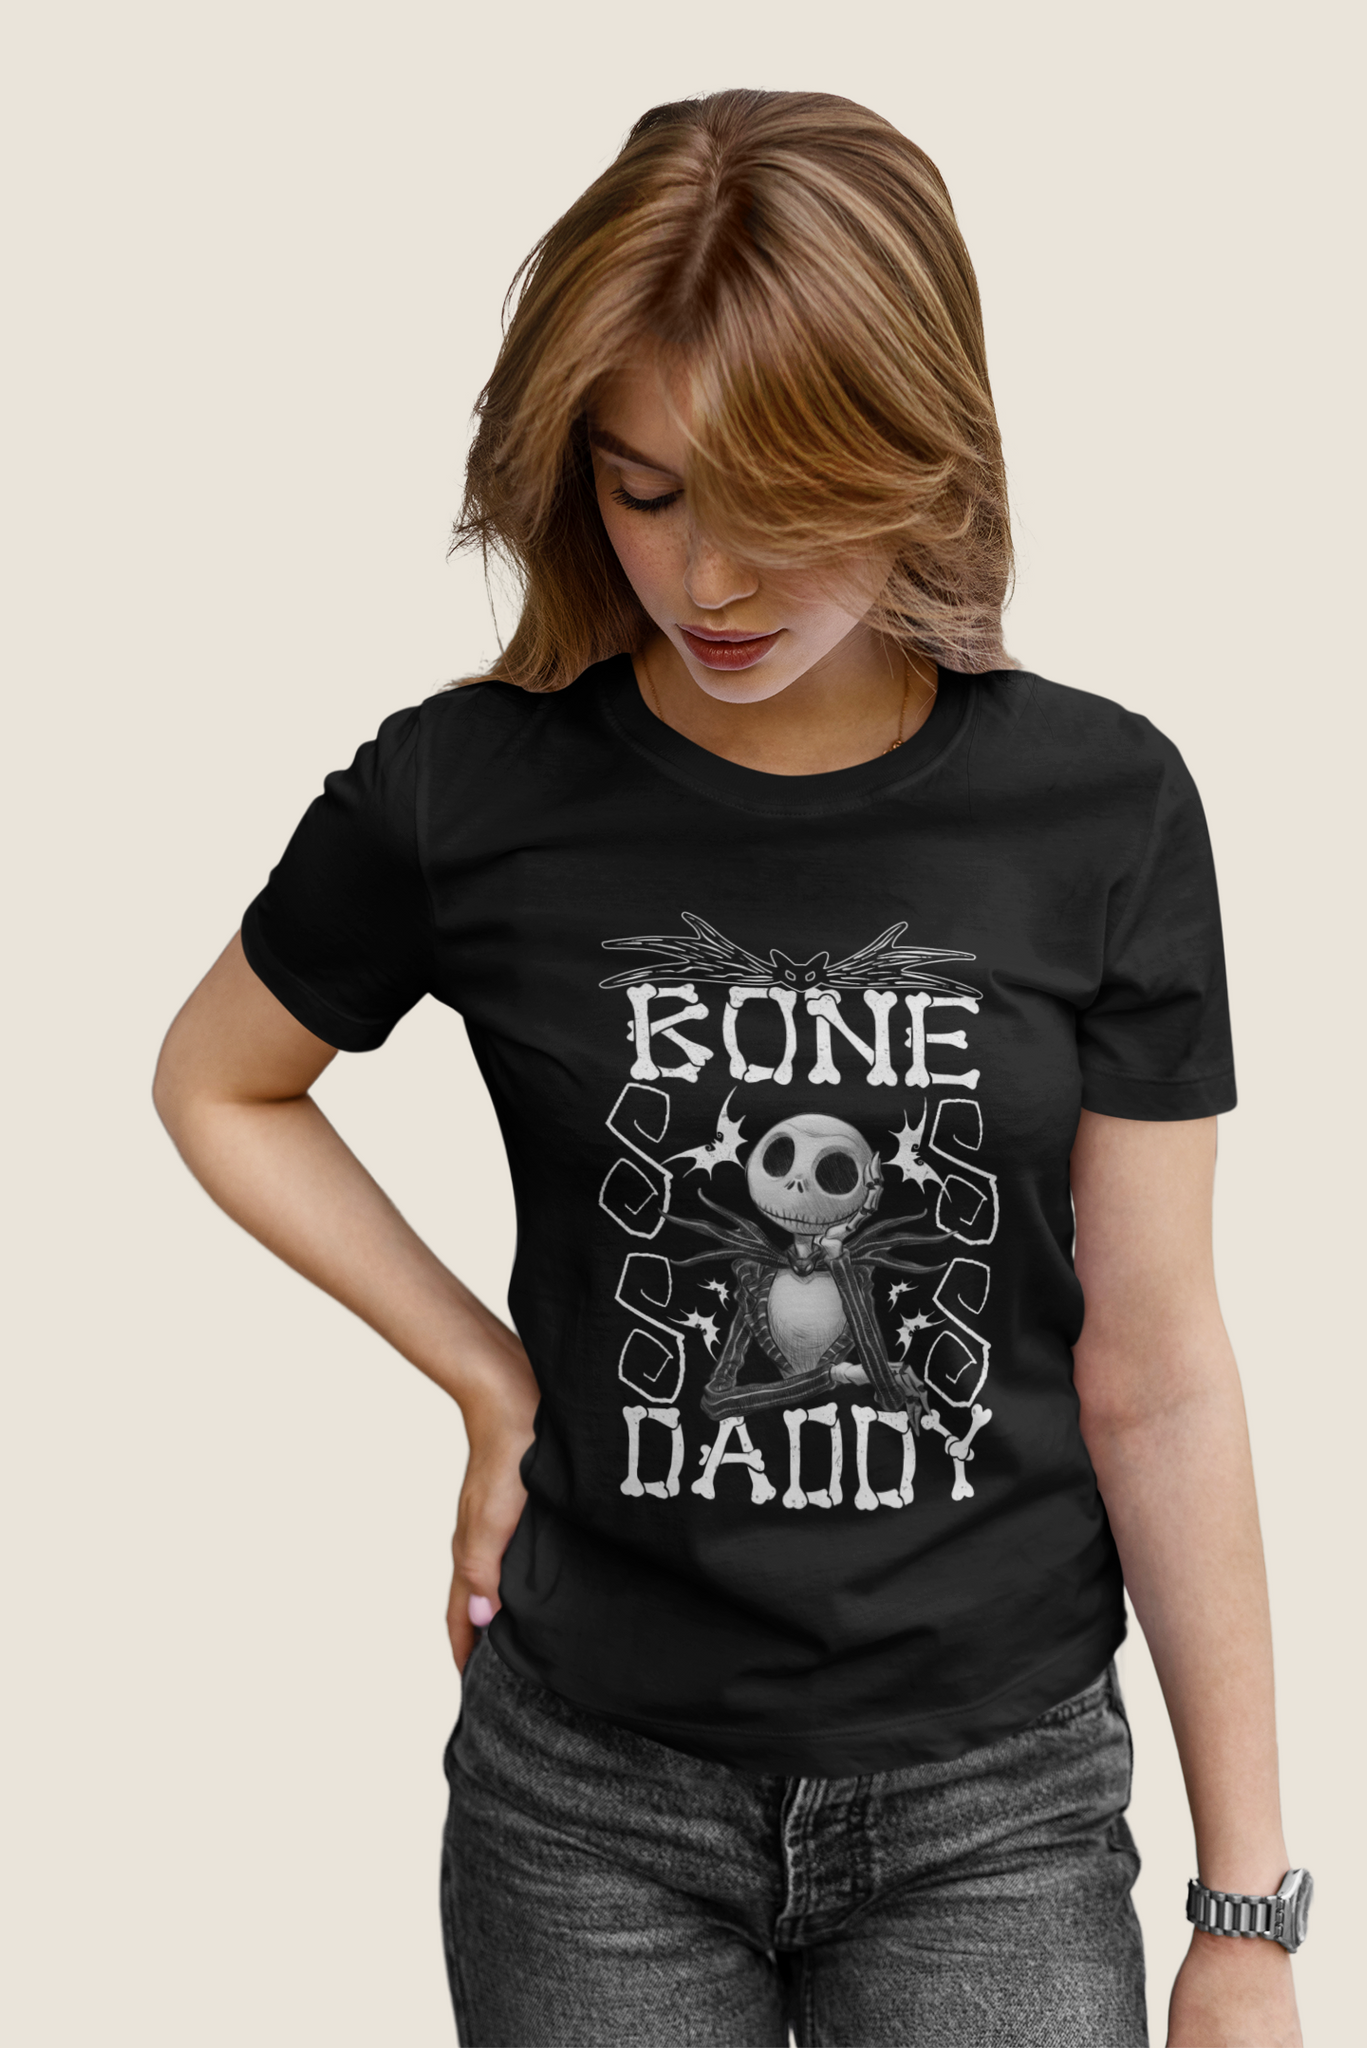 Nightmare Before Christmas T Shirt, Bone Daddy Tshirt, Jack Skellington T Shirt, Fathers Day Gifts, Halloween Gifts